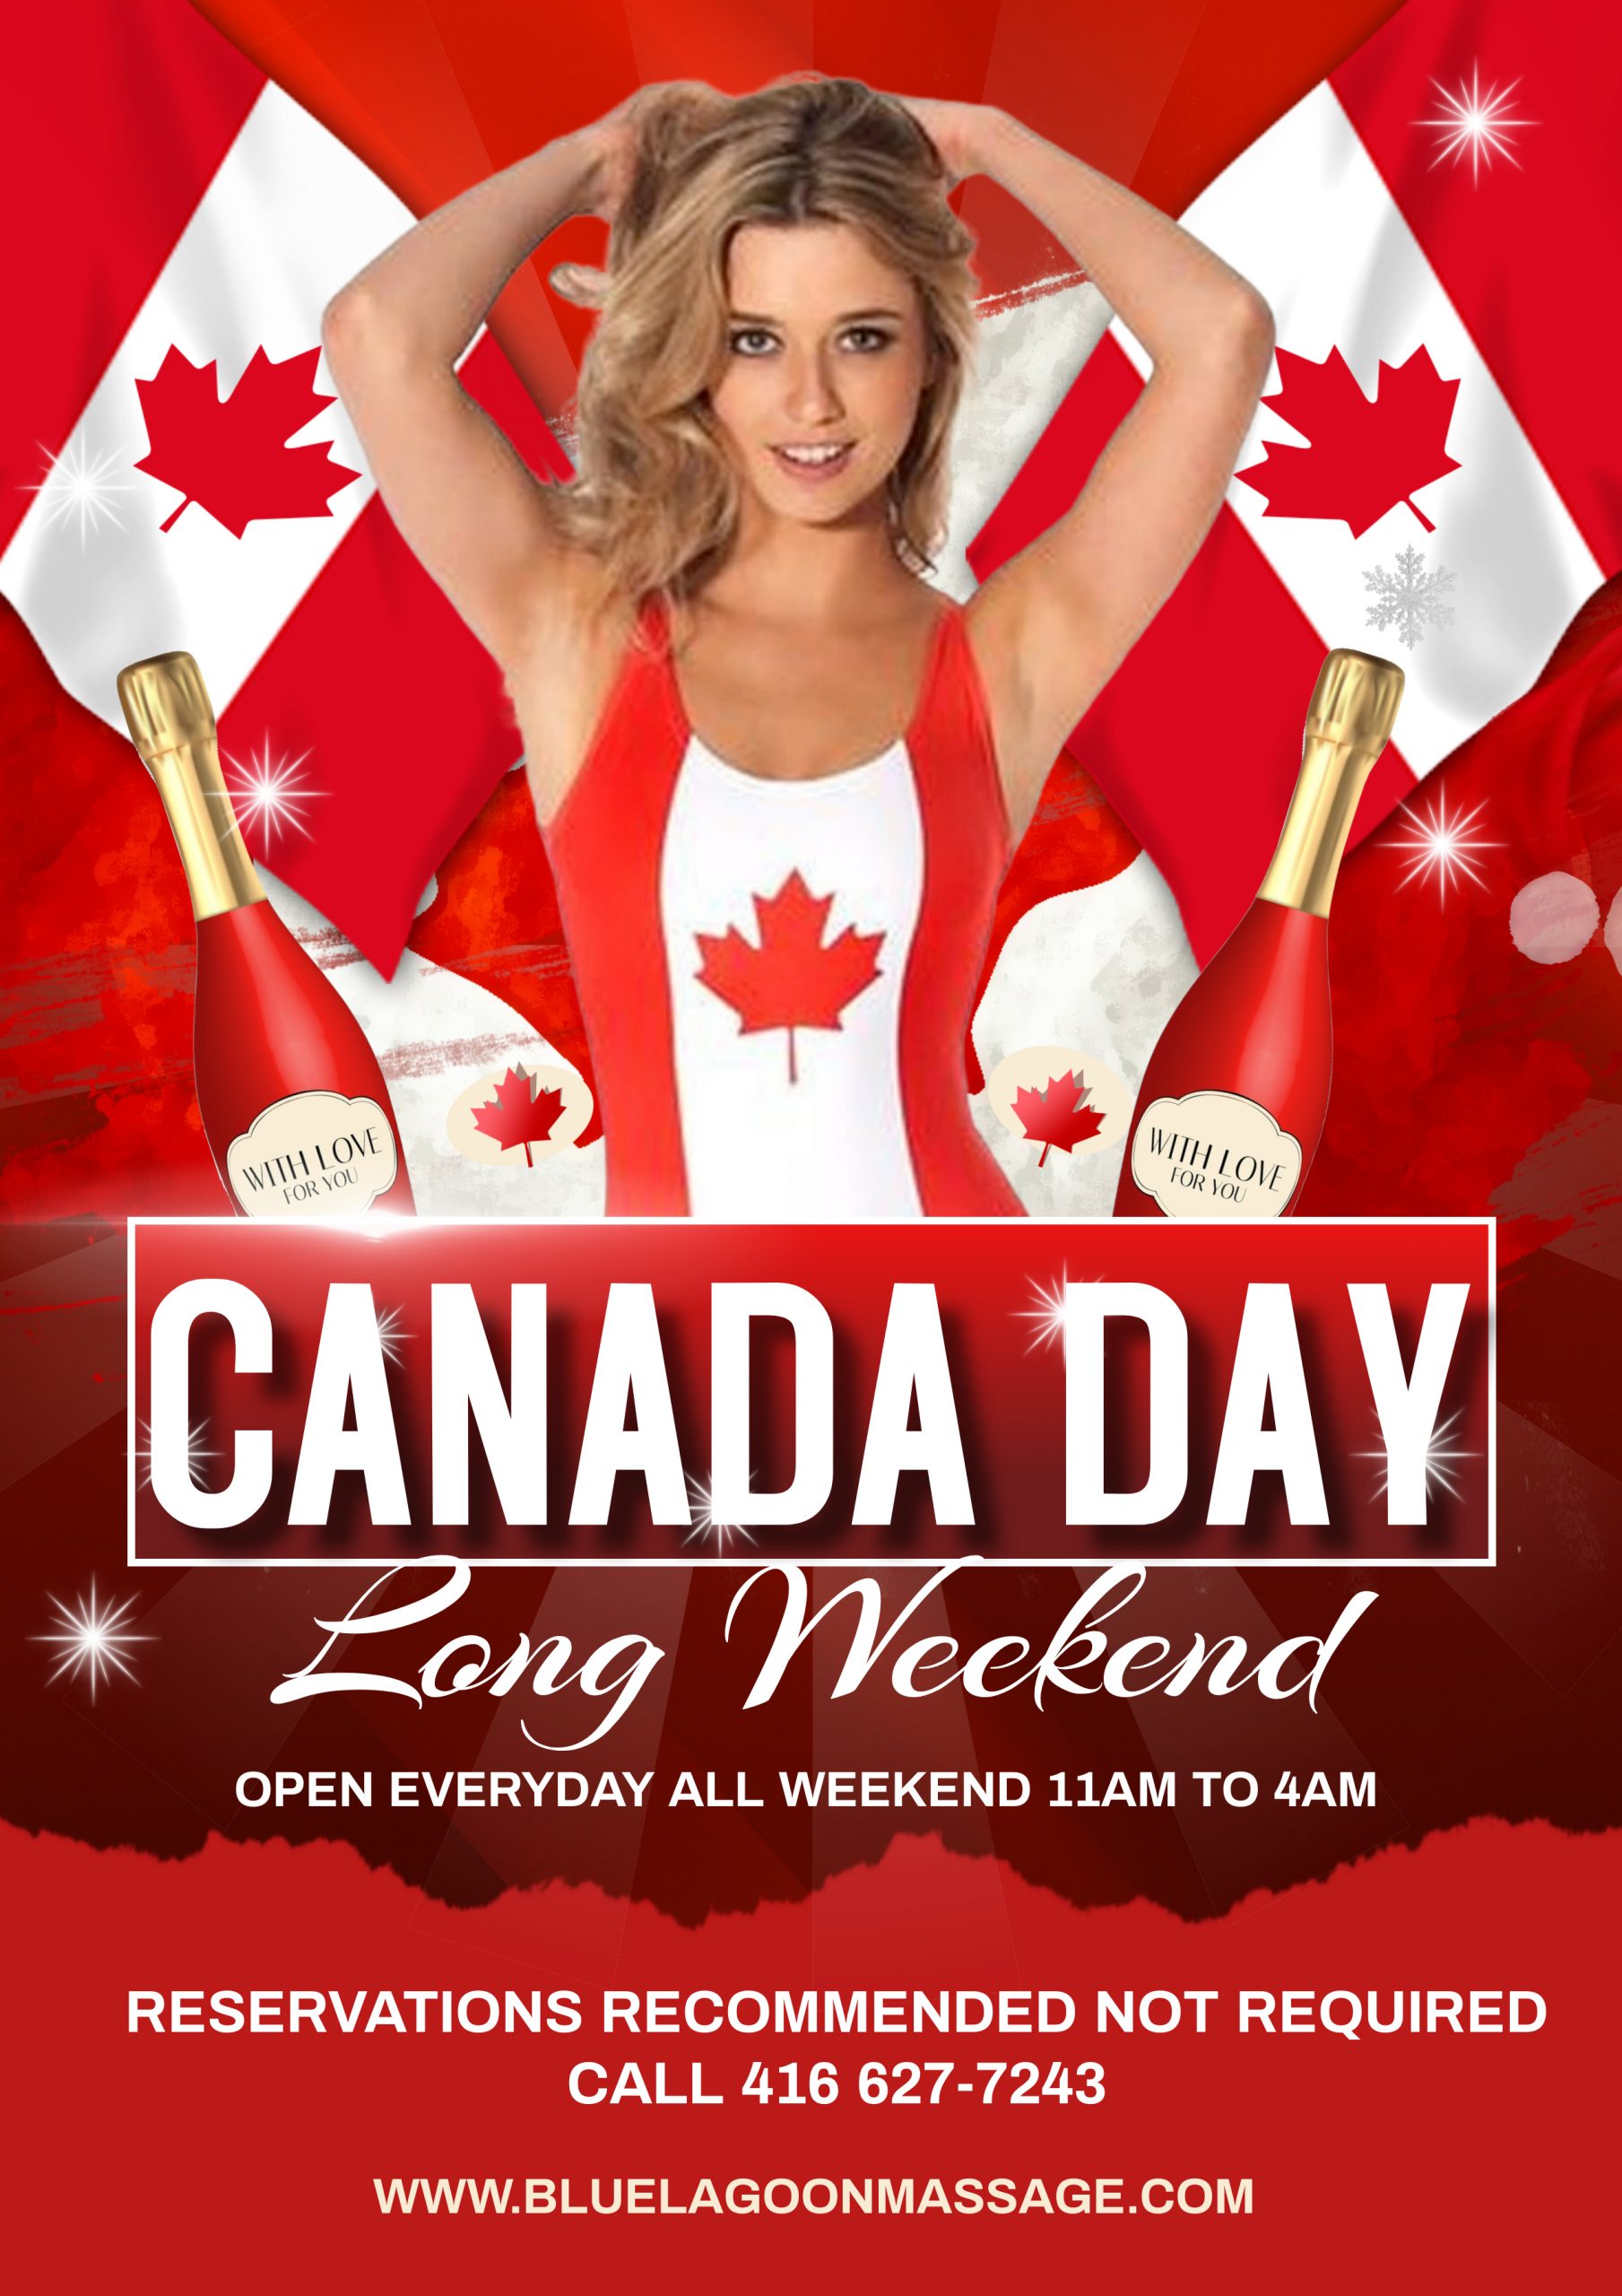 CANADA DAY WEBSITE